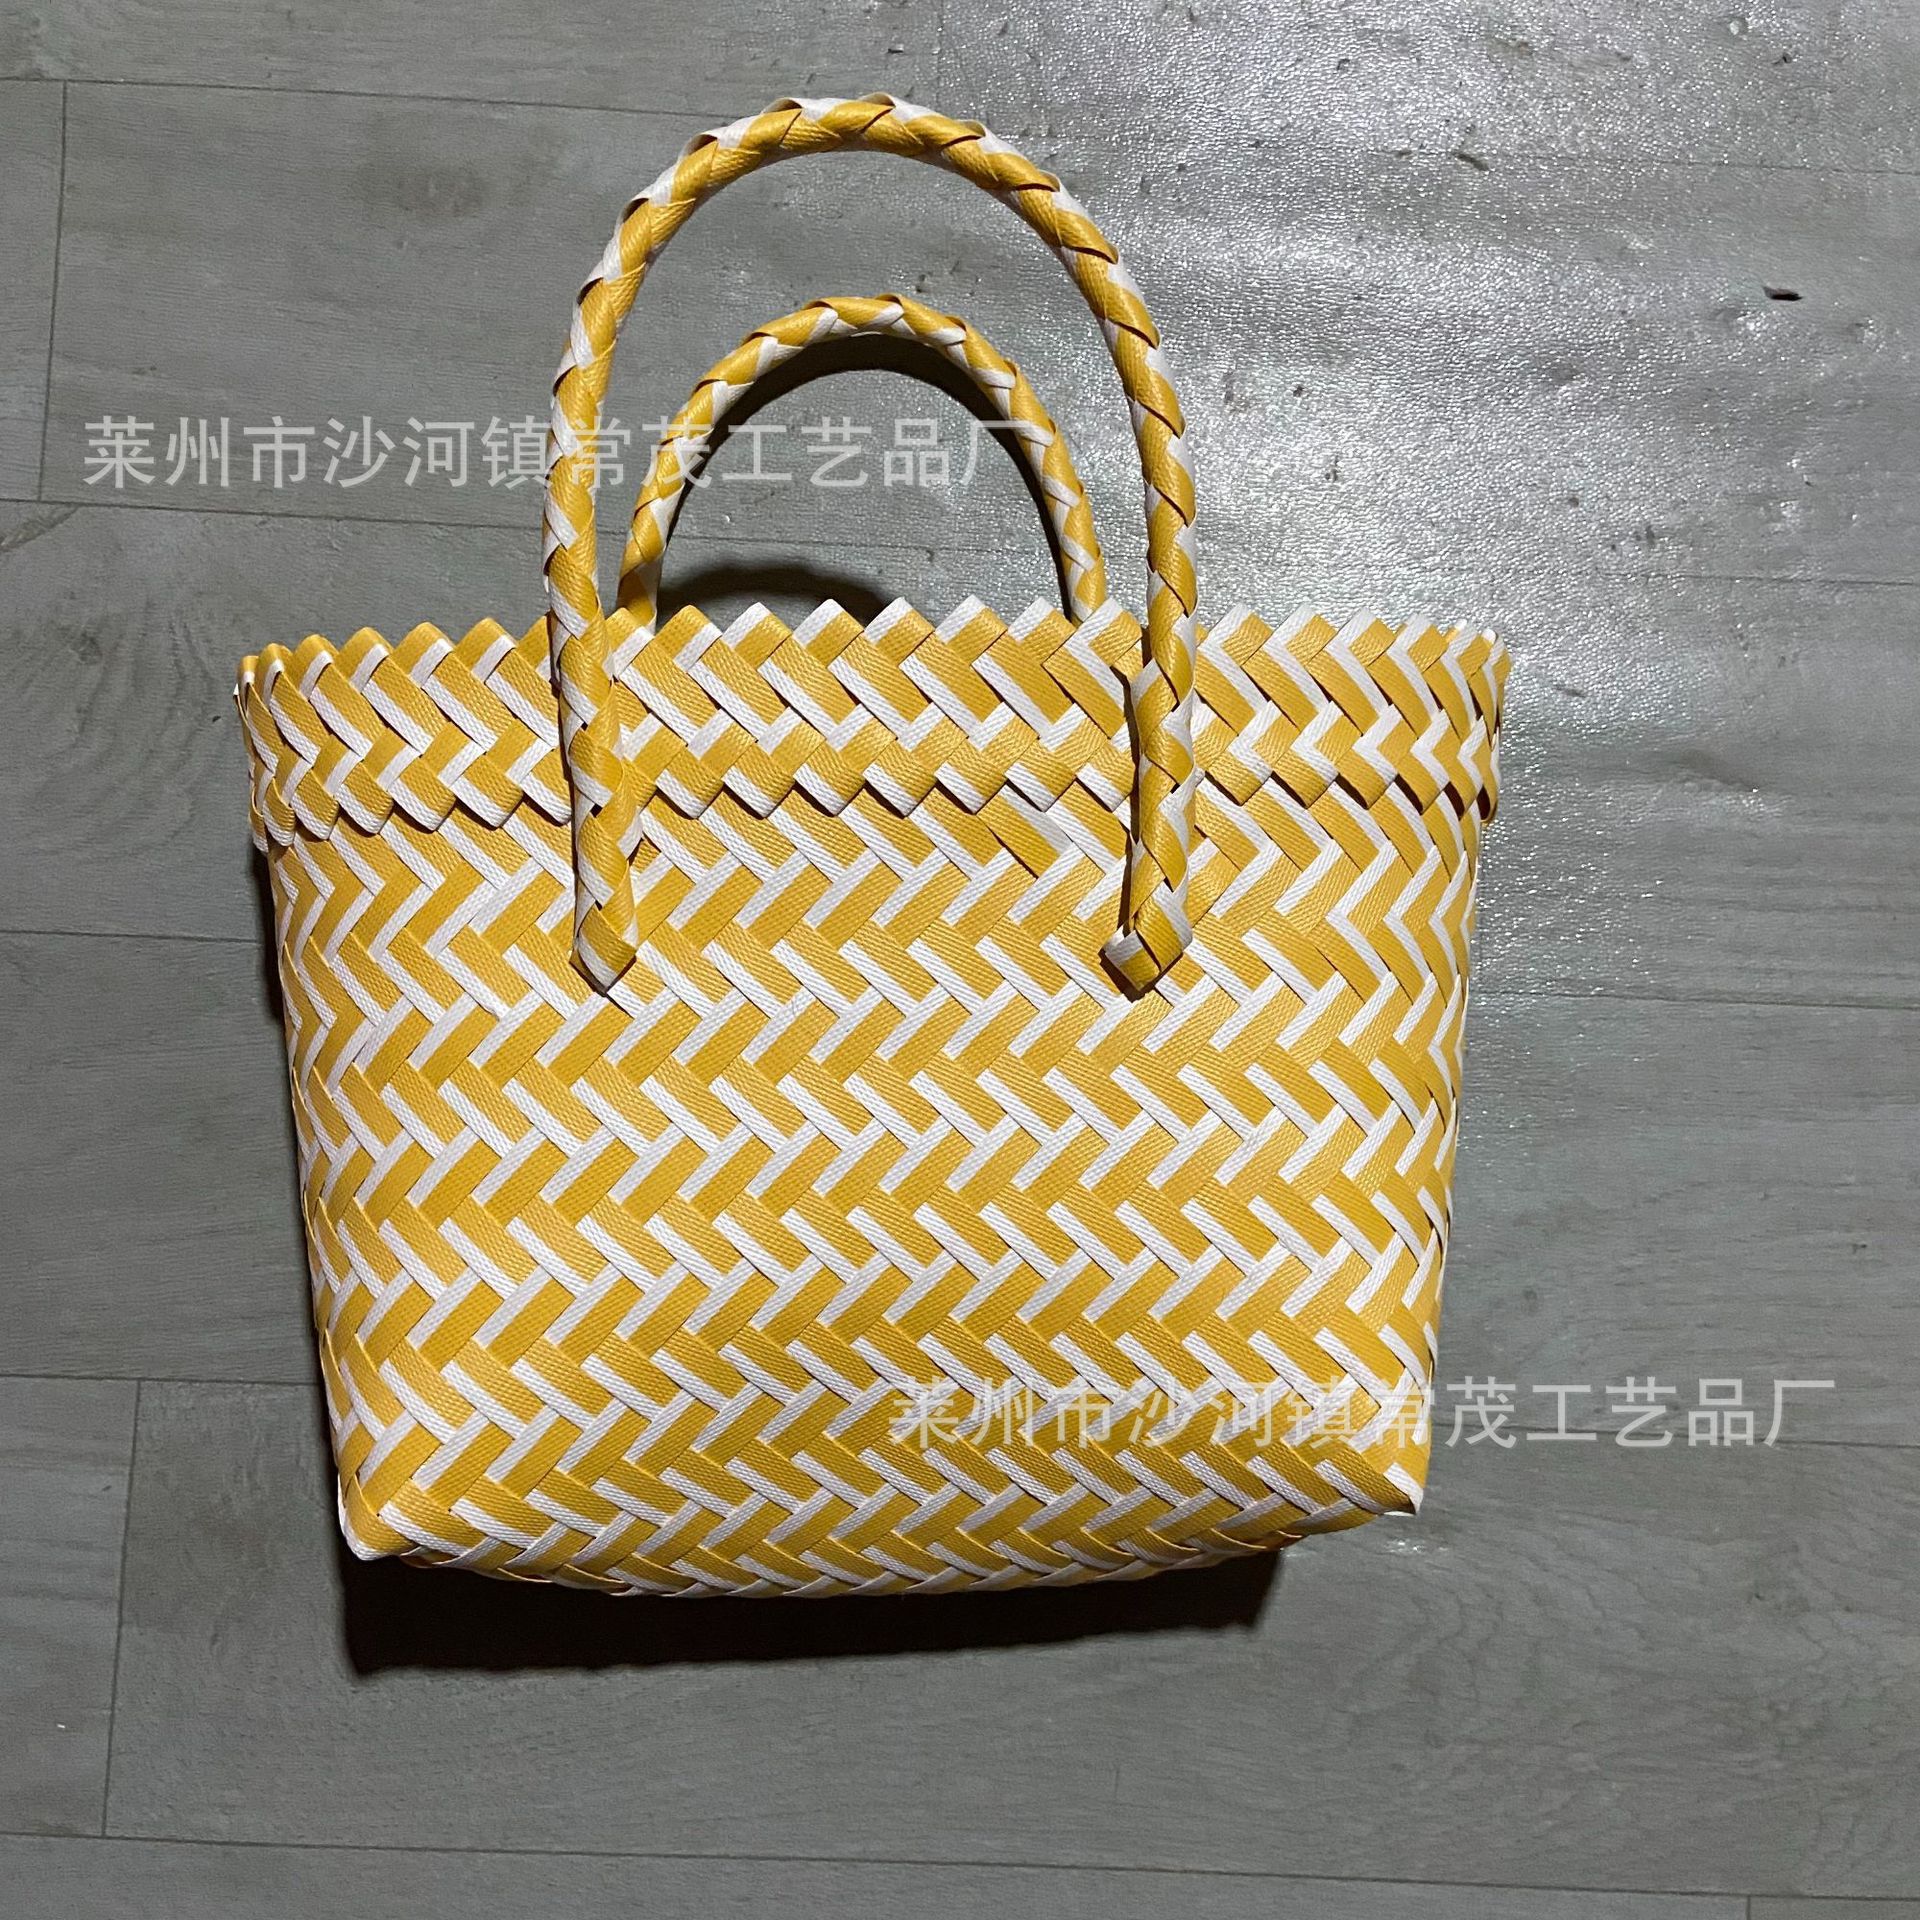 Hand-Woven Handbag Oblique Woven Knitted Basket, Horizontal, Square, Small Square Bag, Casual Women's Bag